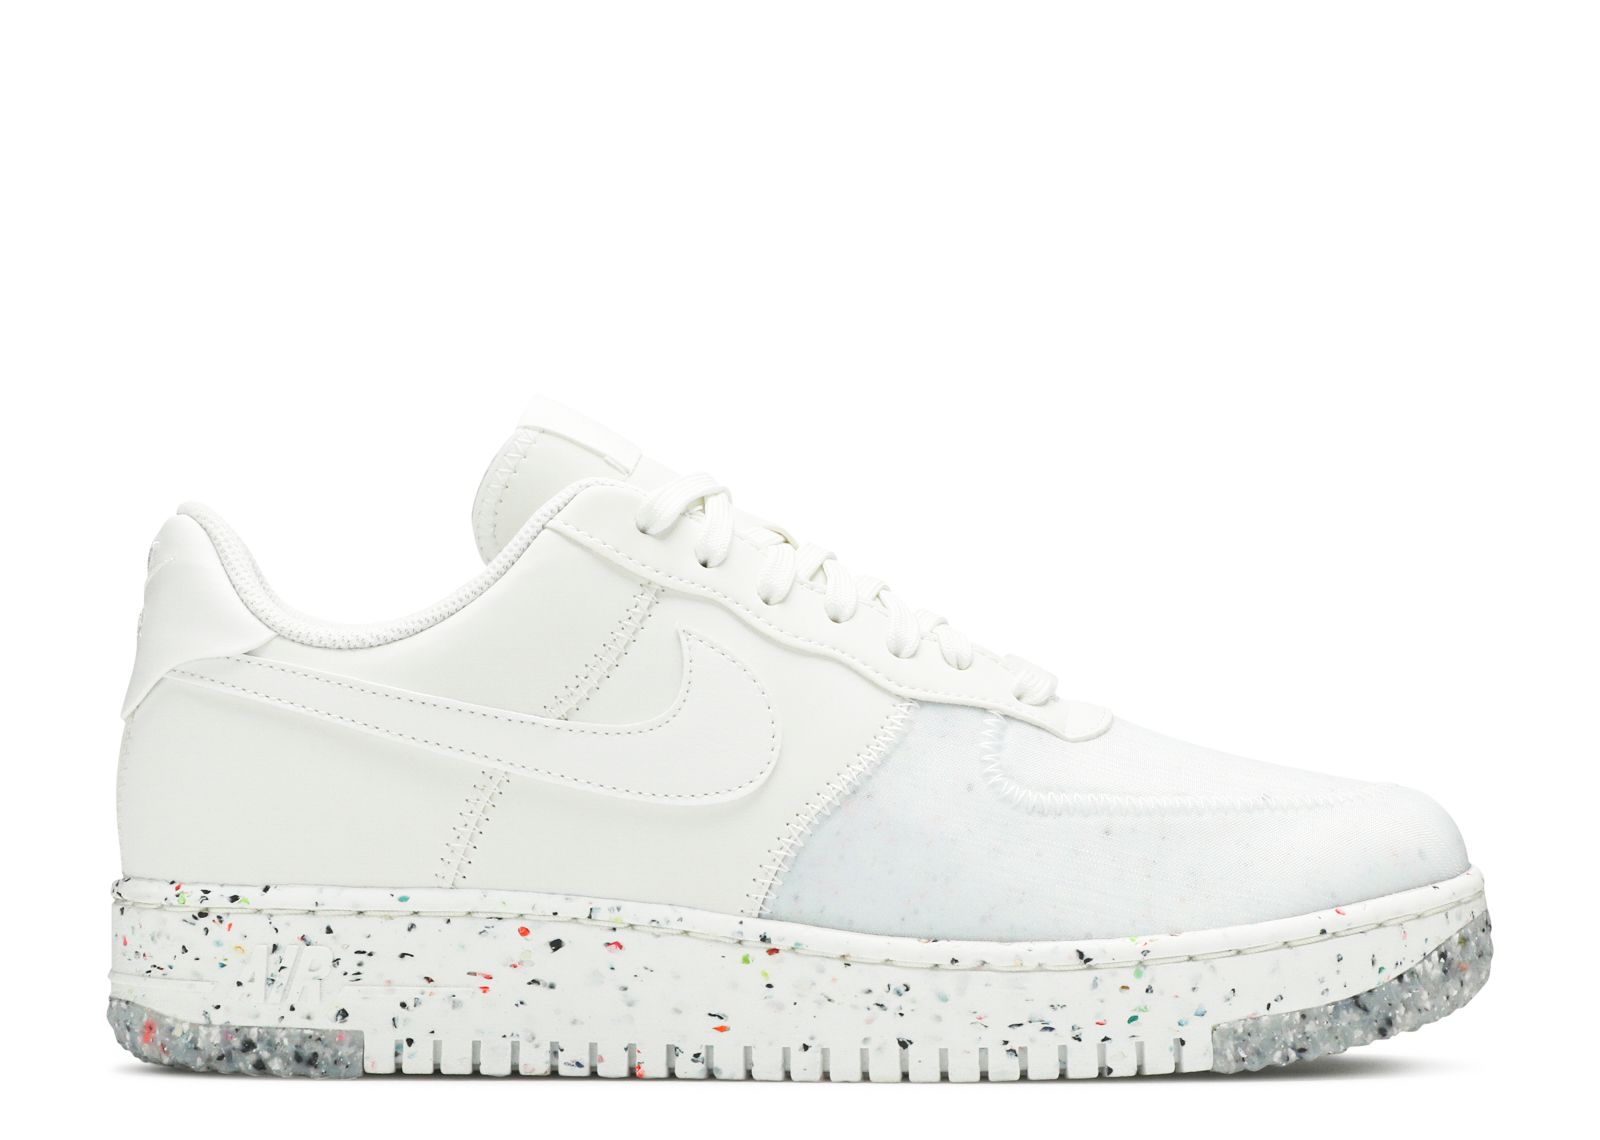 Hubert Hudson llegada interferencia Air Force 1 Crater 'Summit White' - Nike - CZ1524 100 - pure platinum/summit  white/chambray blue/barely volt | Flight Club